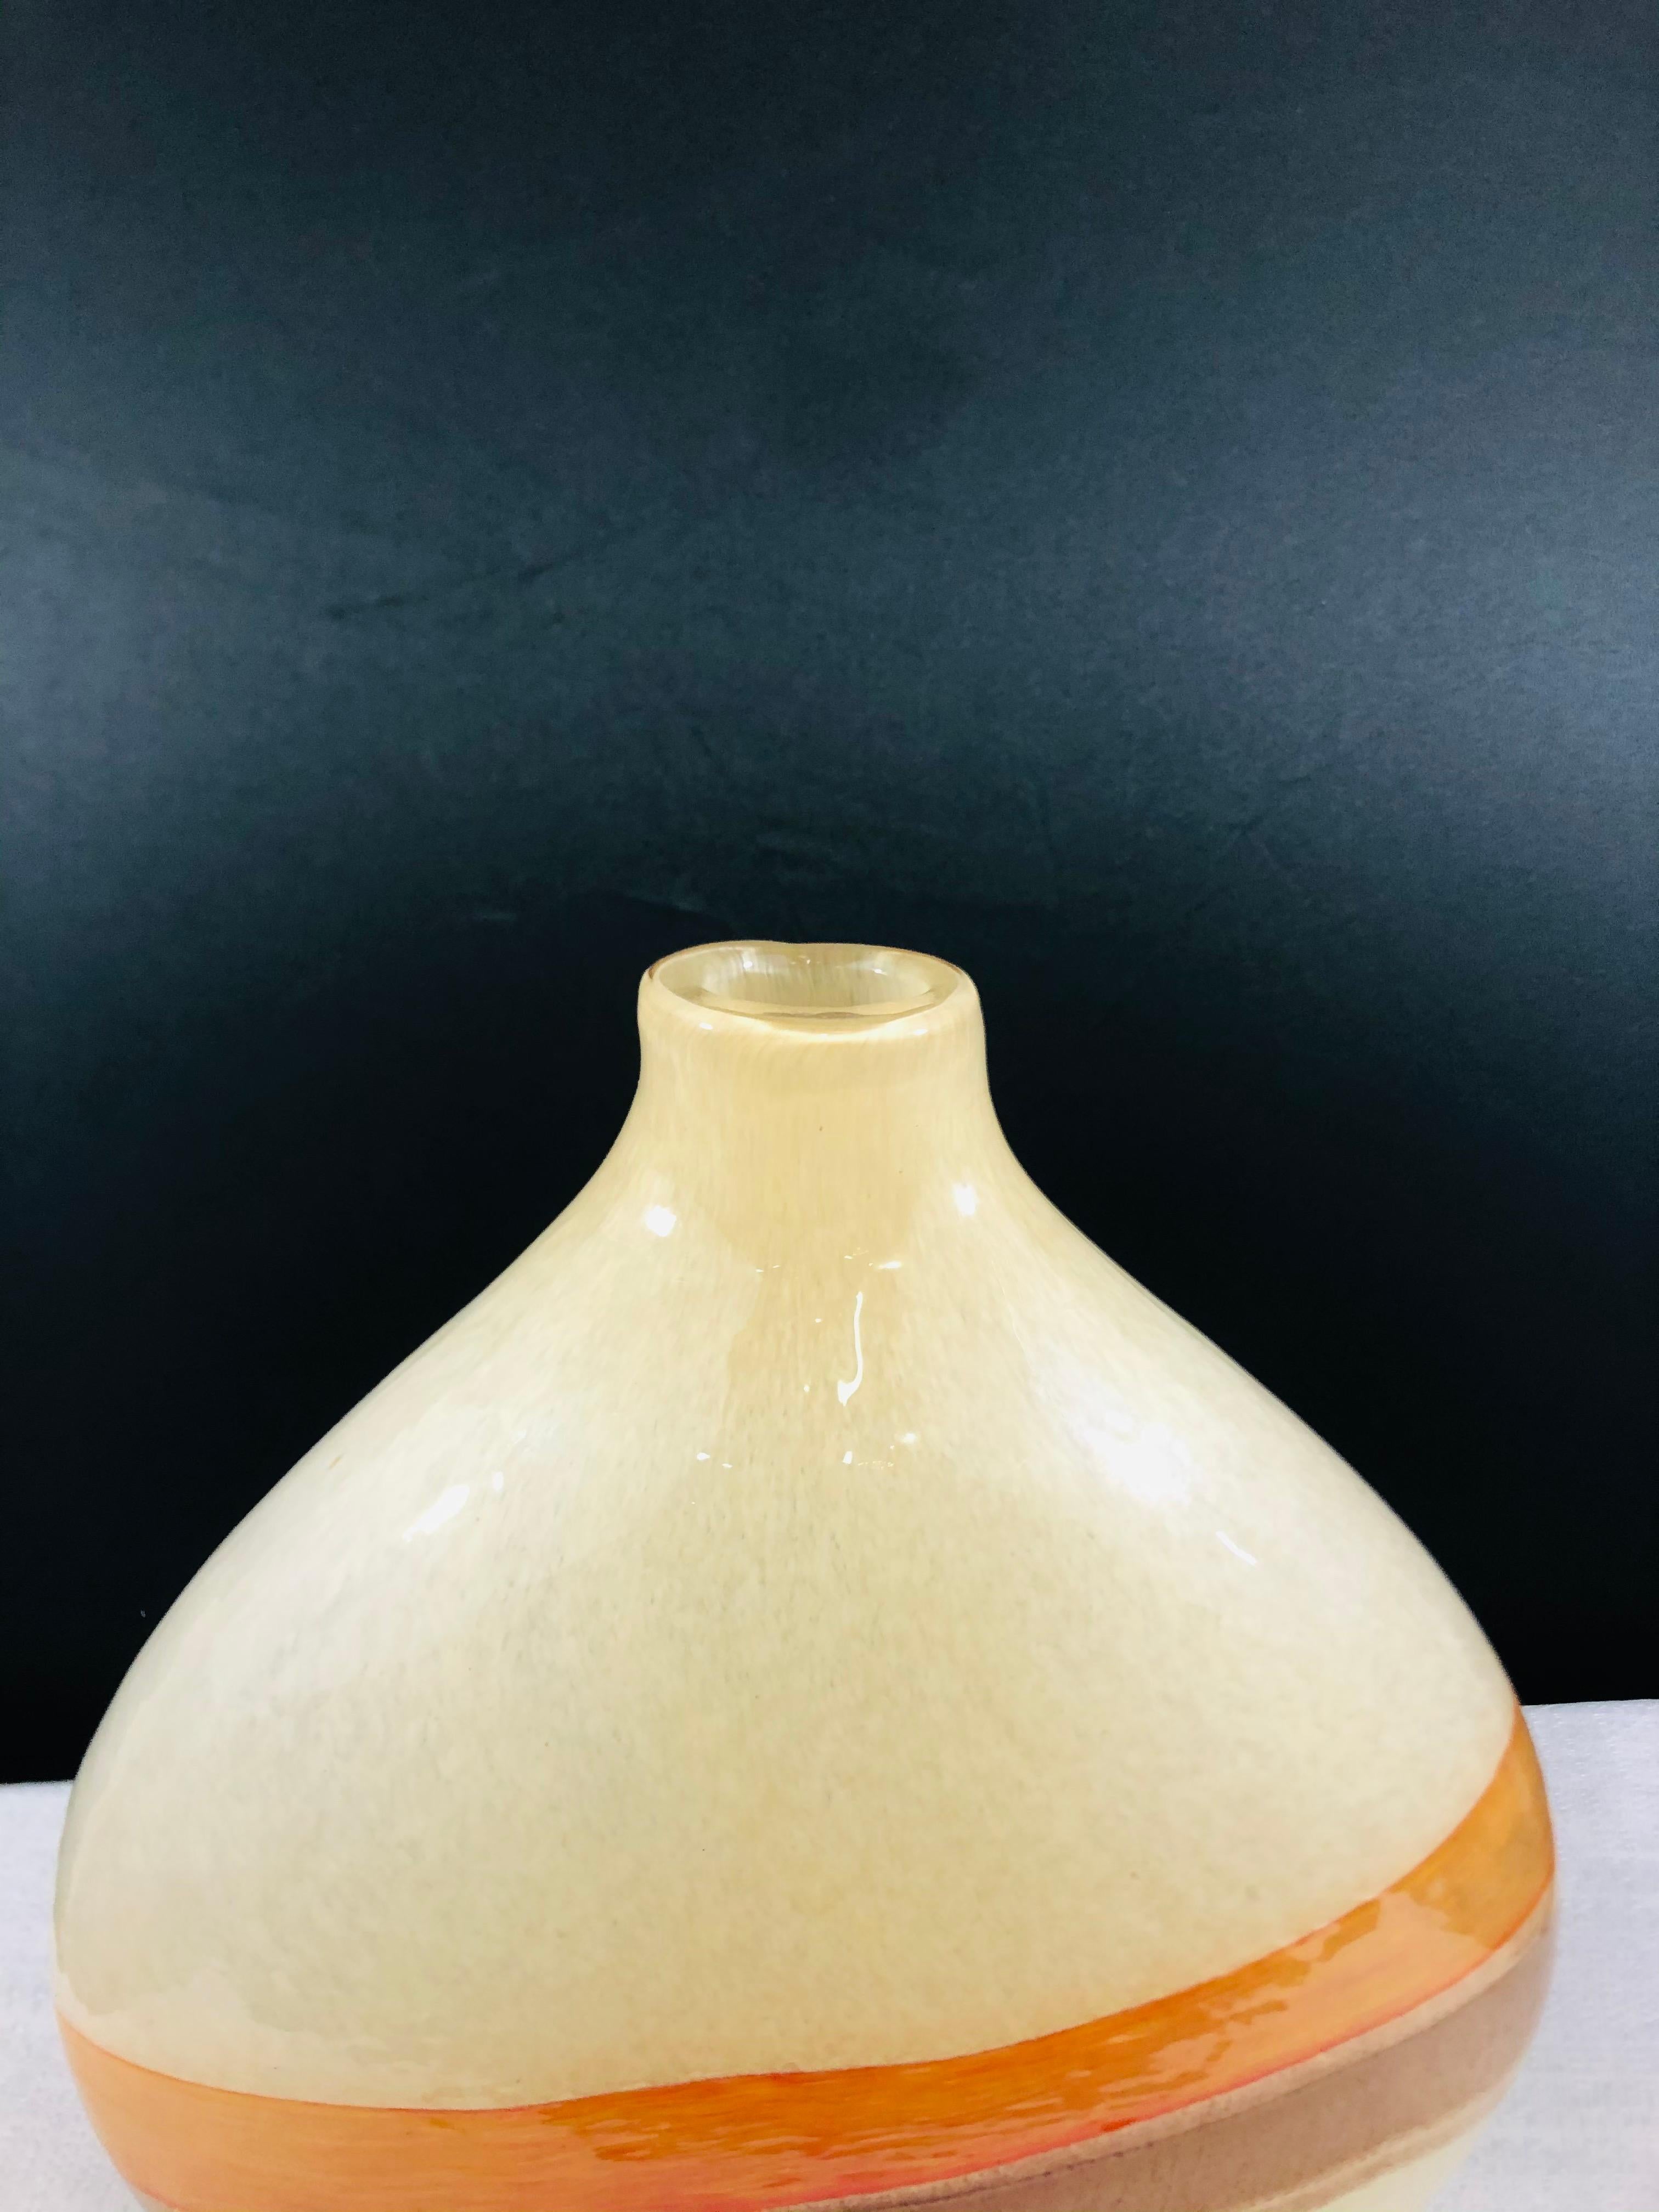 An elegant Mid-Century Modern Murano glass decorative vase in beige tone with brown and orange stripe design. This vase will add a touch of style to any space.

Measures: 12